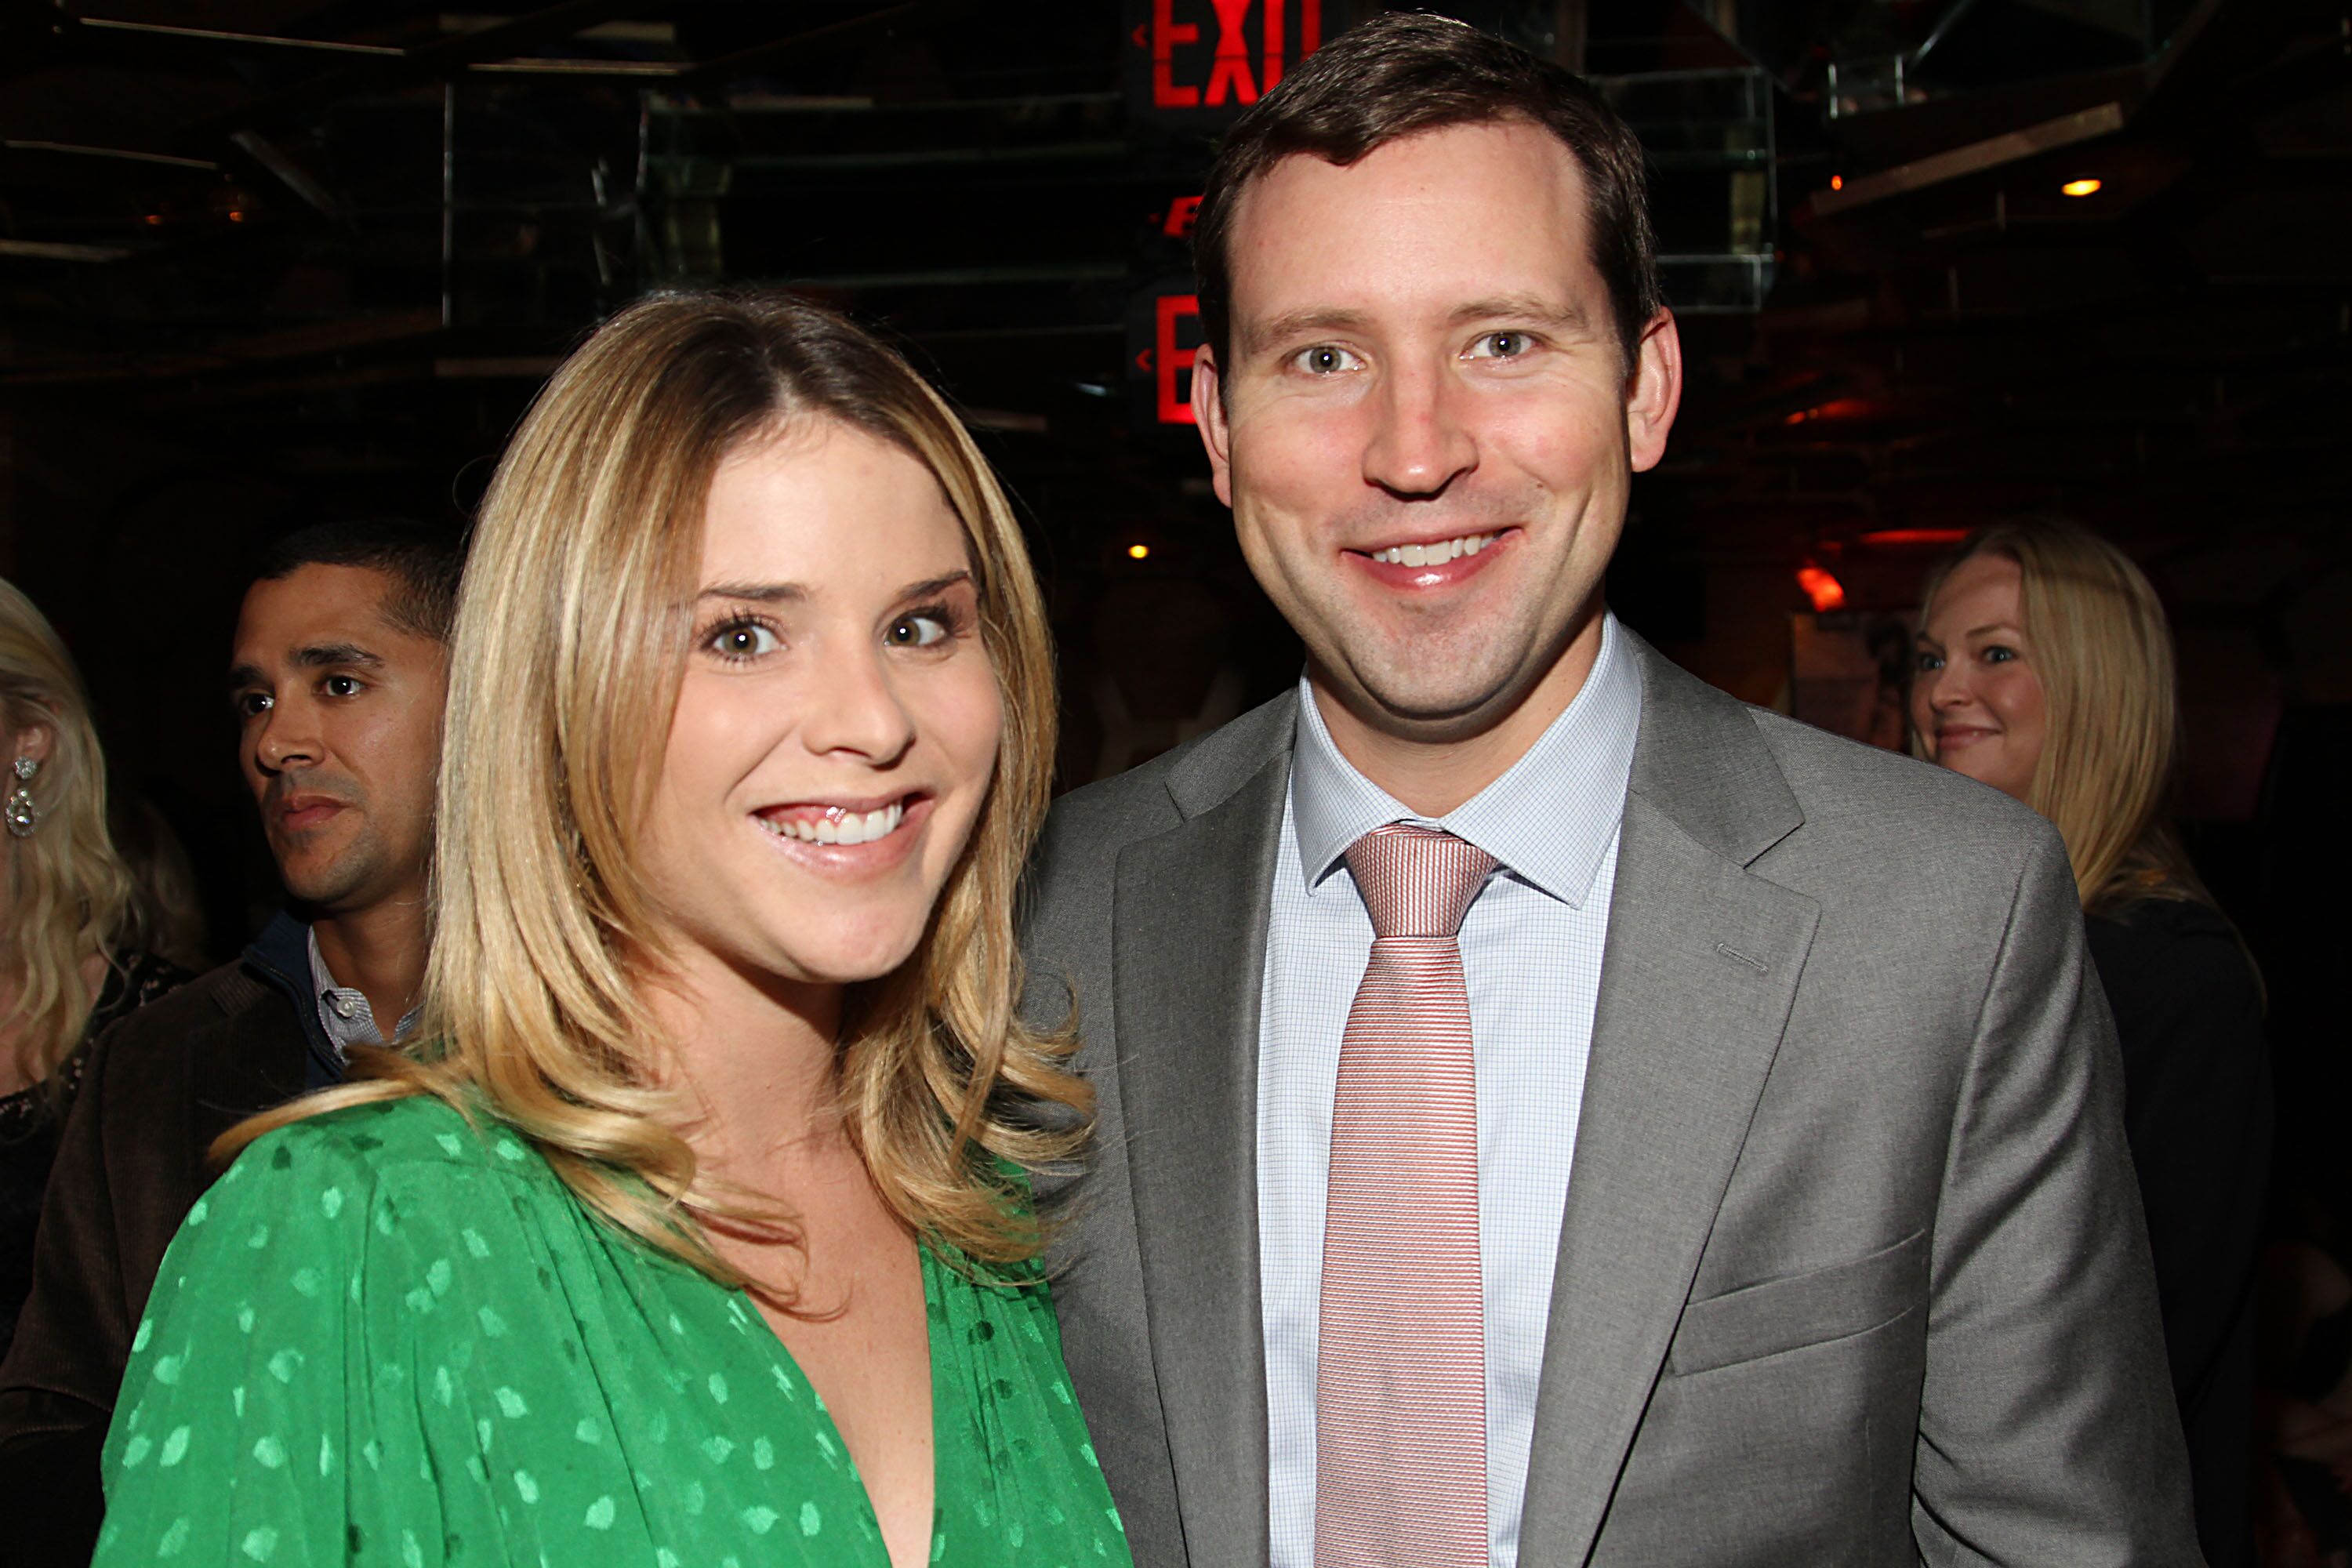 enna Bush Hager and husband Henry Chase Hager at the Georgia Campaign for Adolescent Pregnancy Prevention at Darby Downstairs on October 11, 2012 in New York City. | Photo: Getty Images